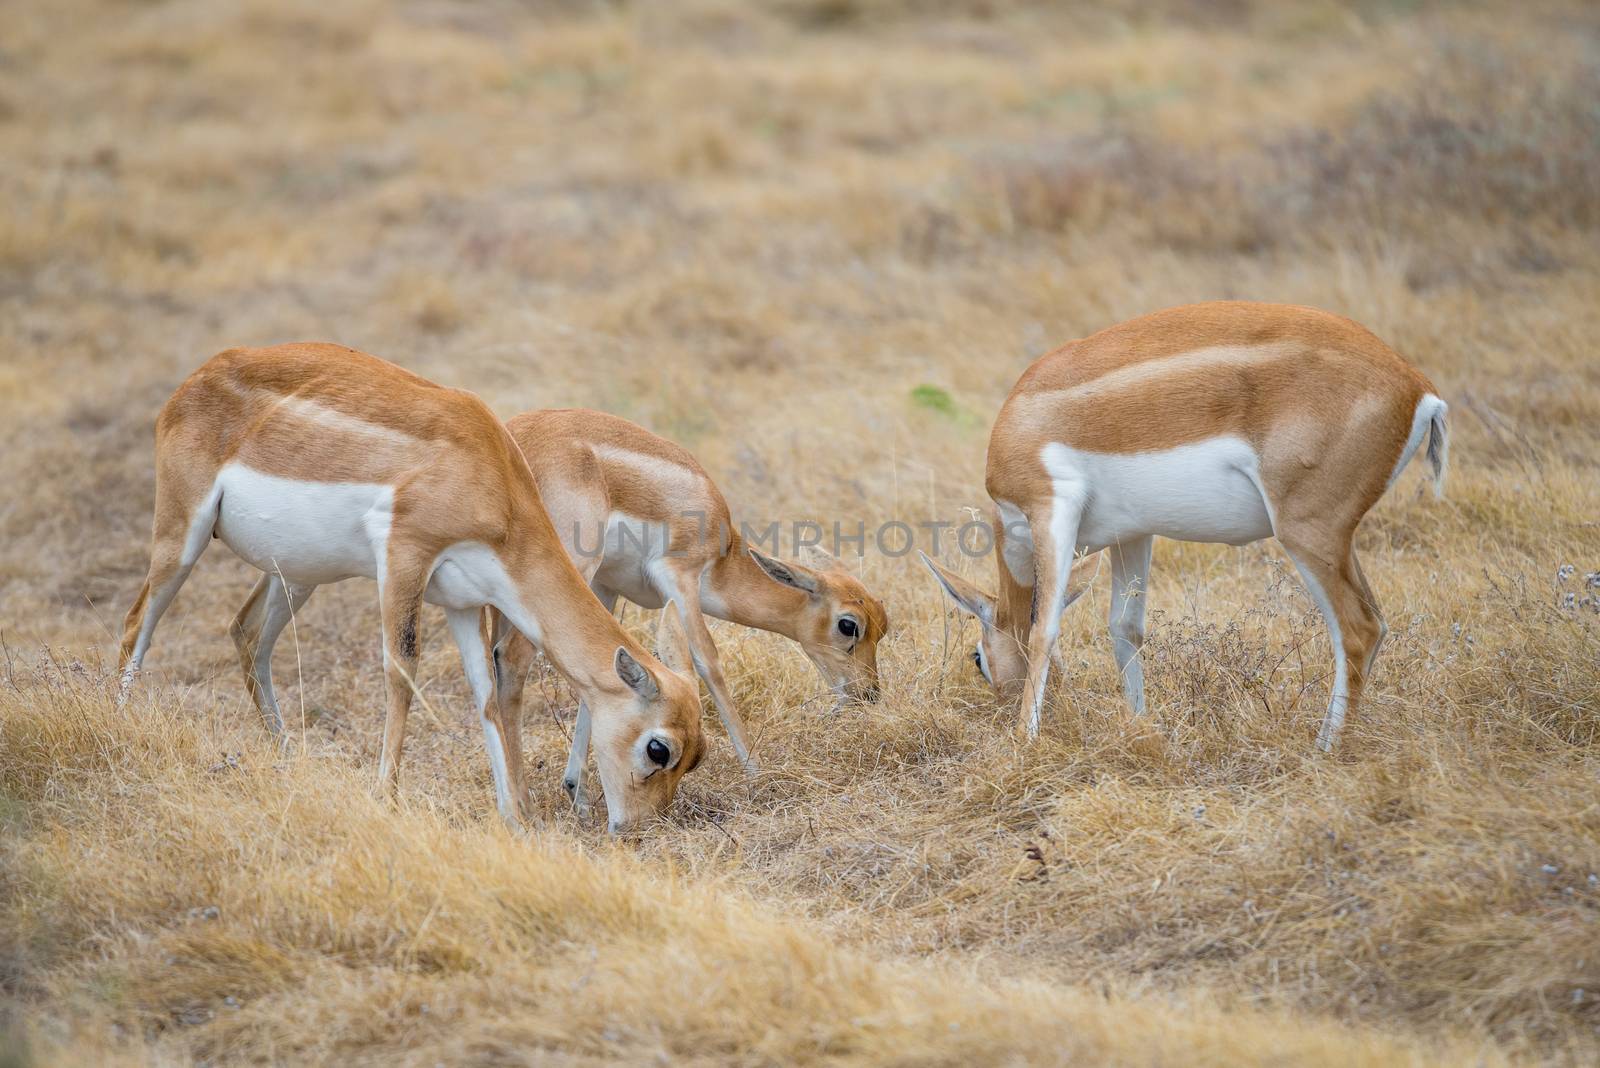 Wild South Texas blackbuck antelope herd of does and a calf